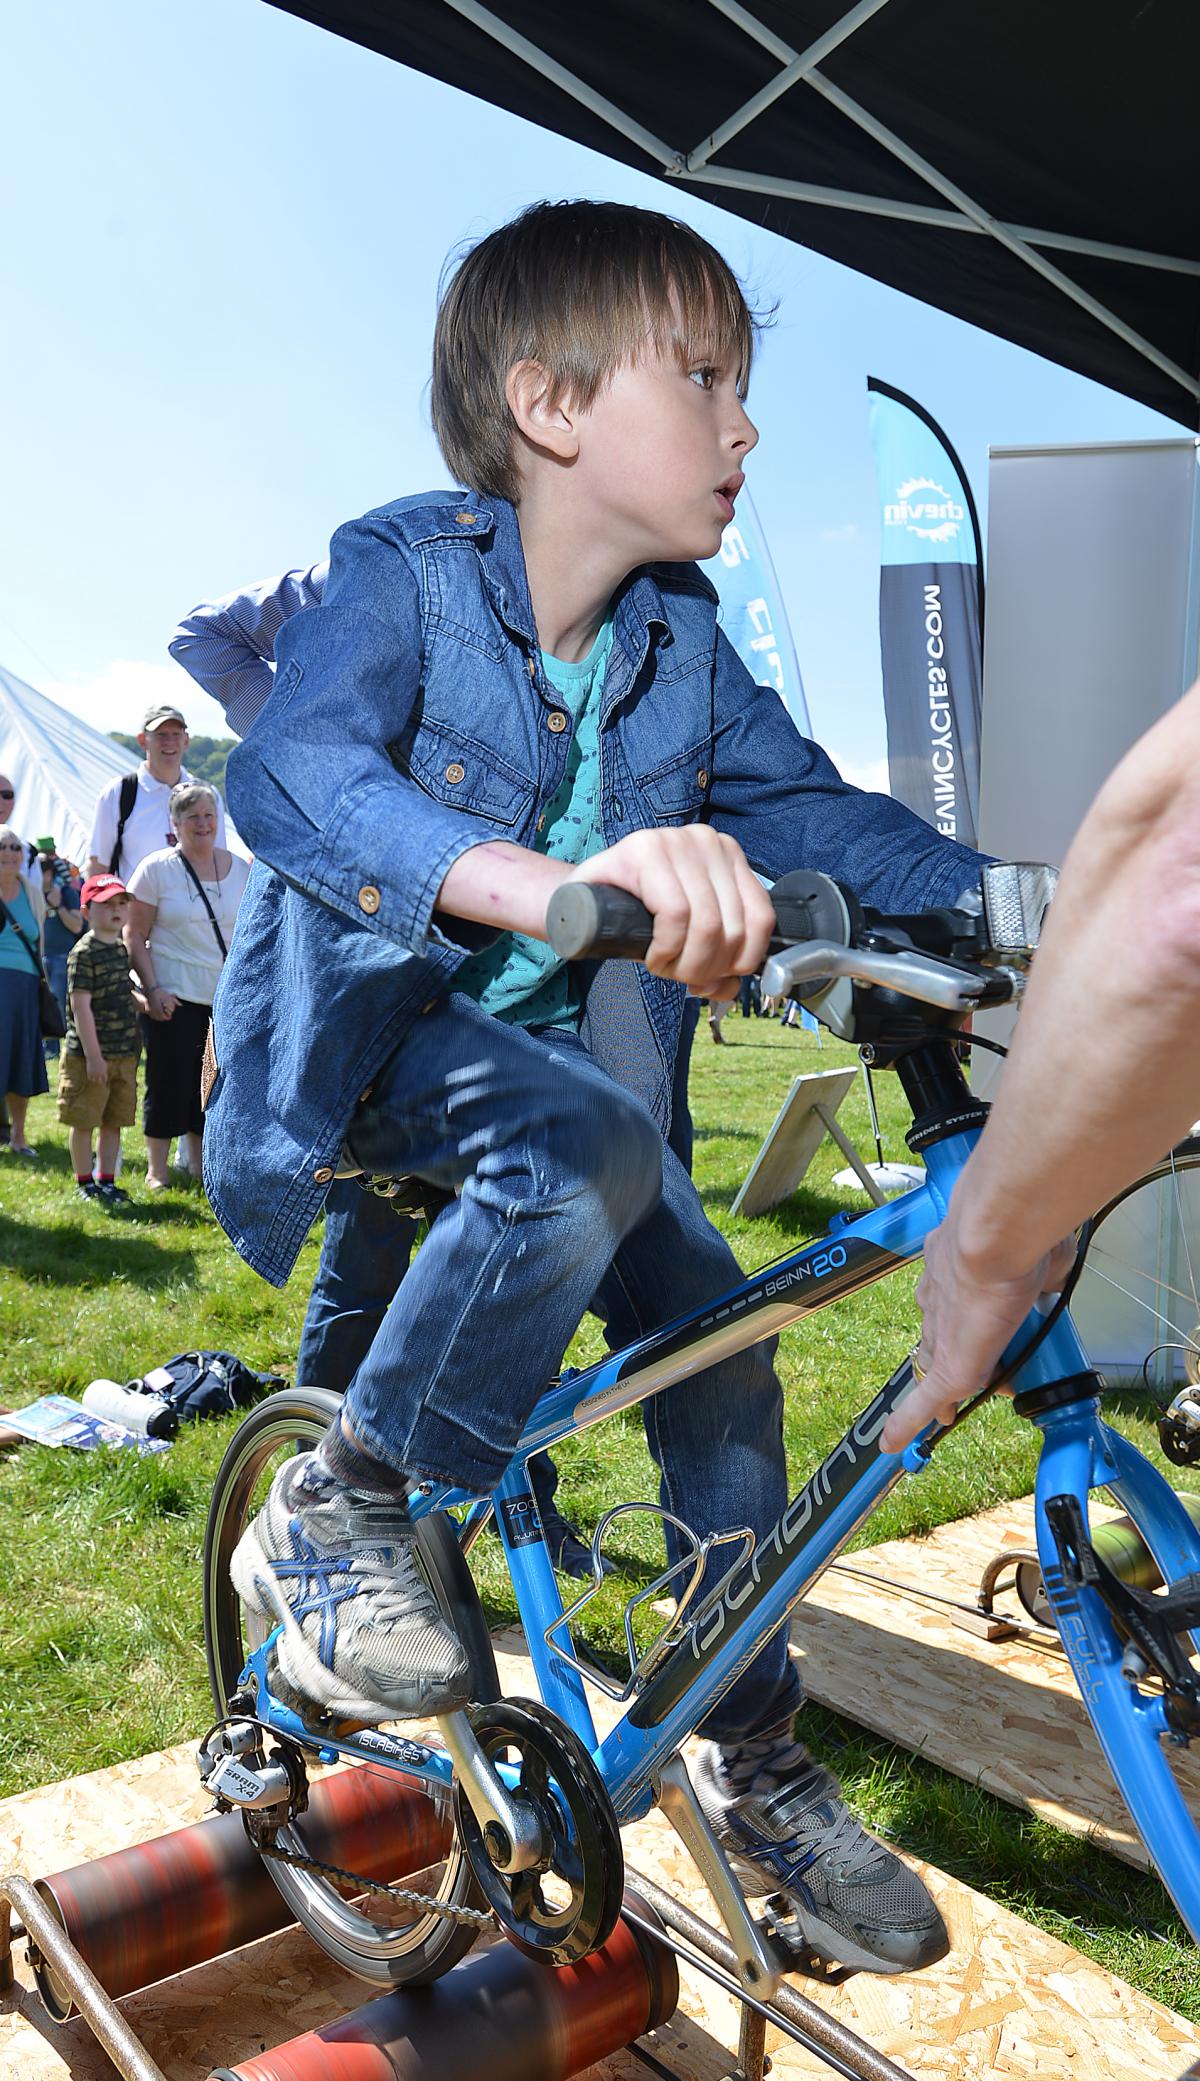 Hugo Dumont takes on his big sister at the cycling challenge at the Otley Cycle Club stand 